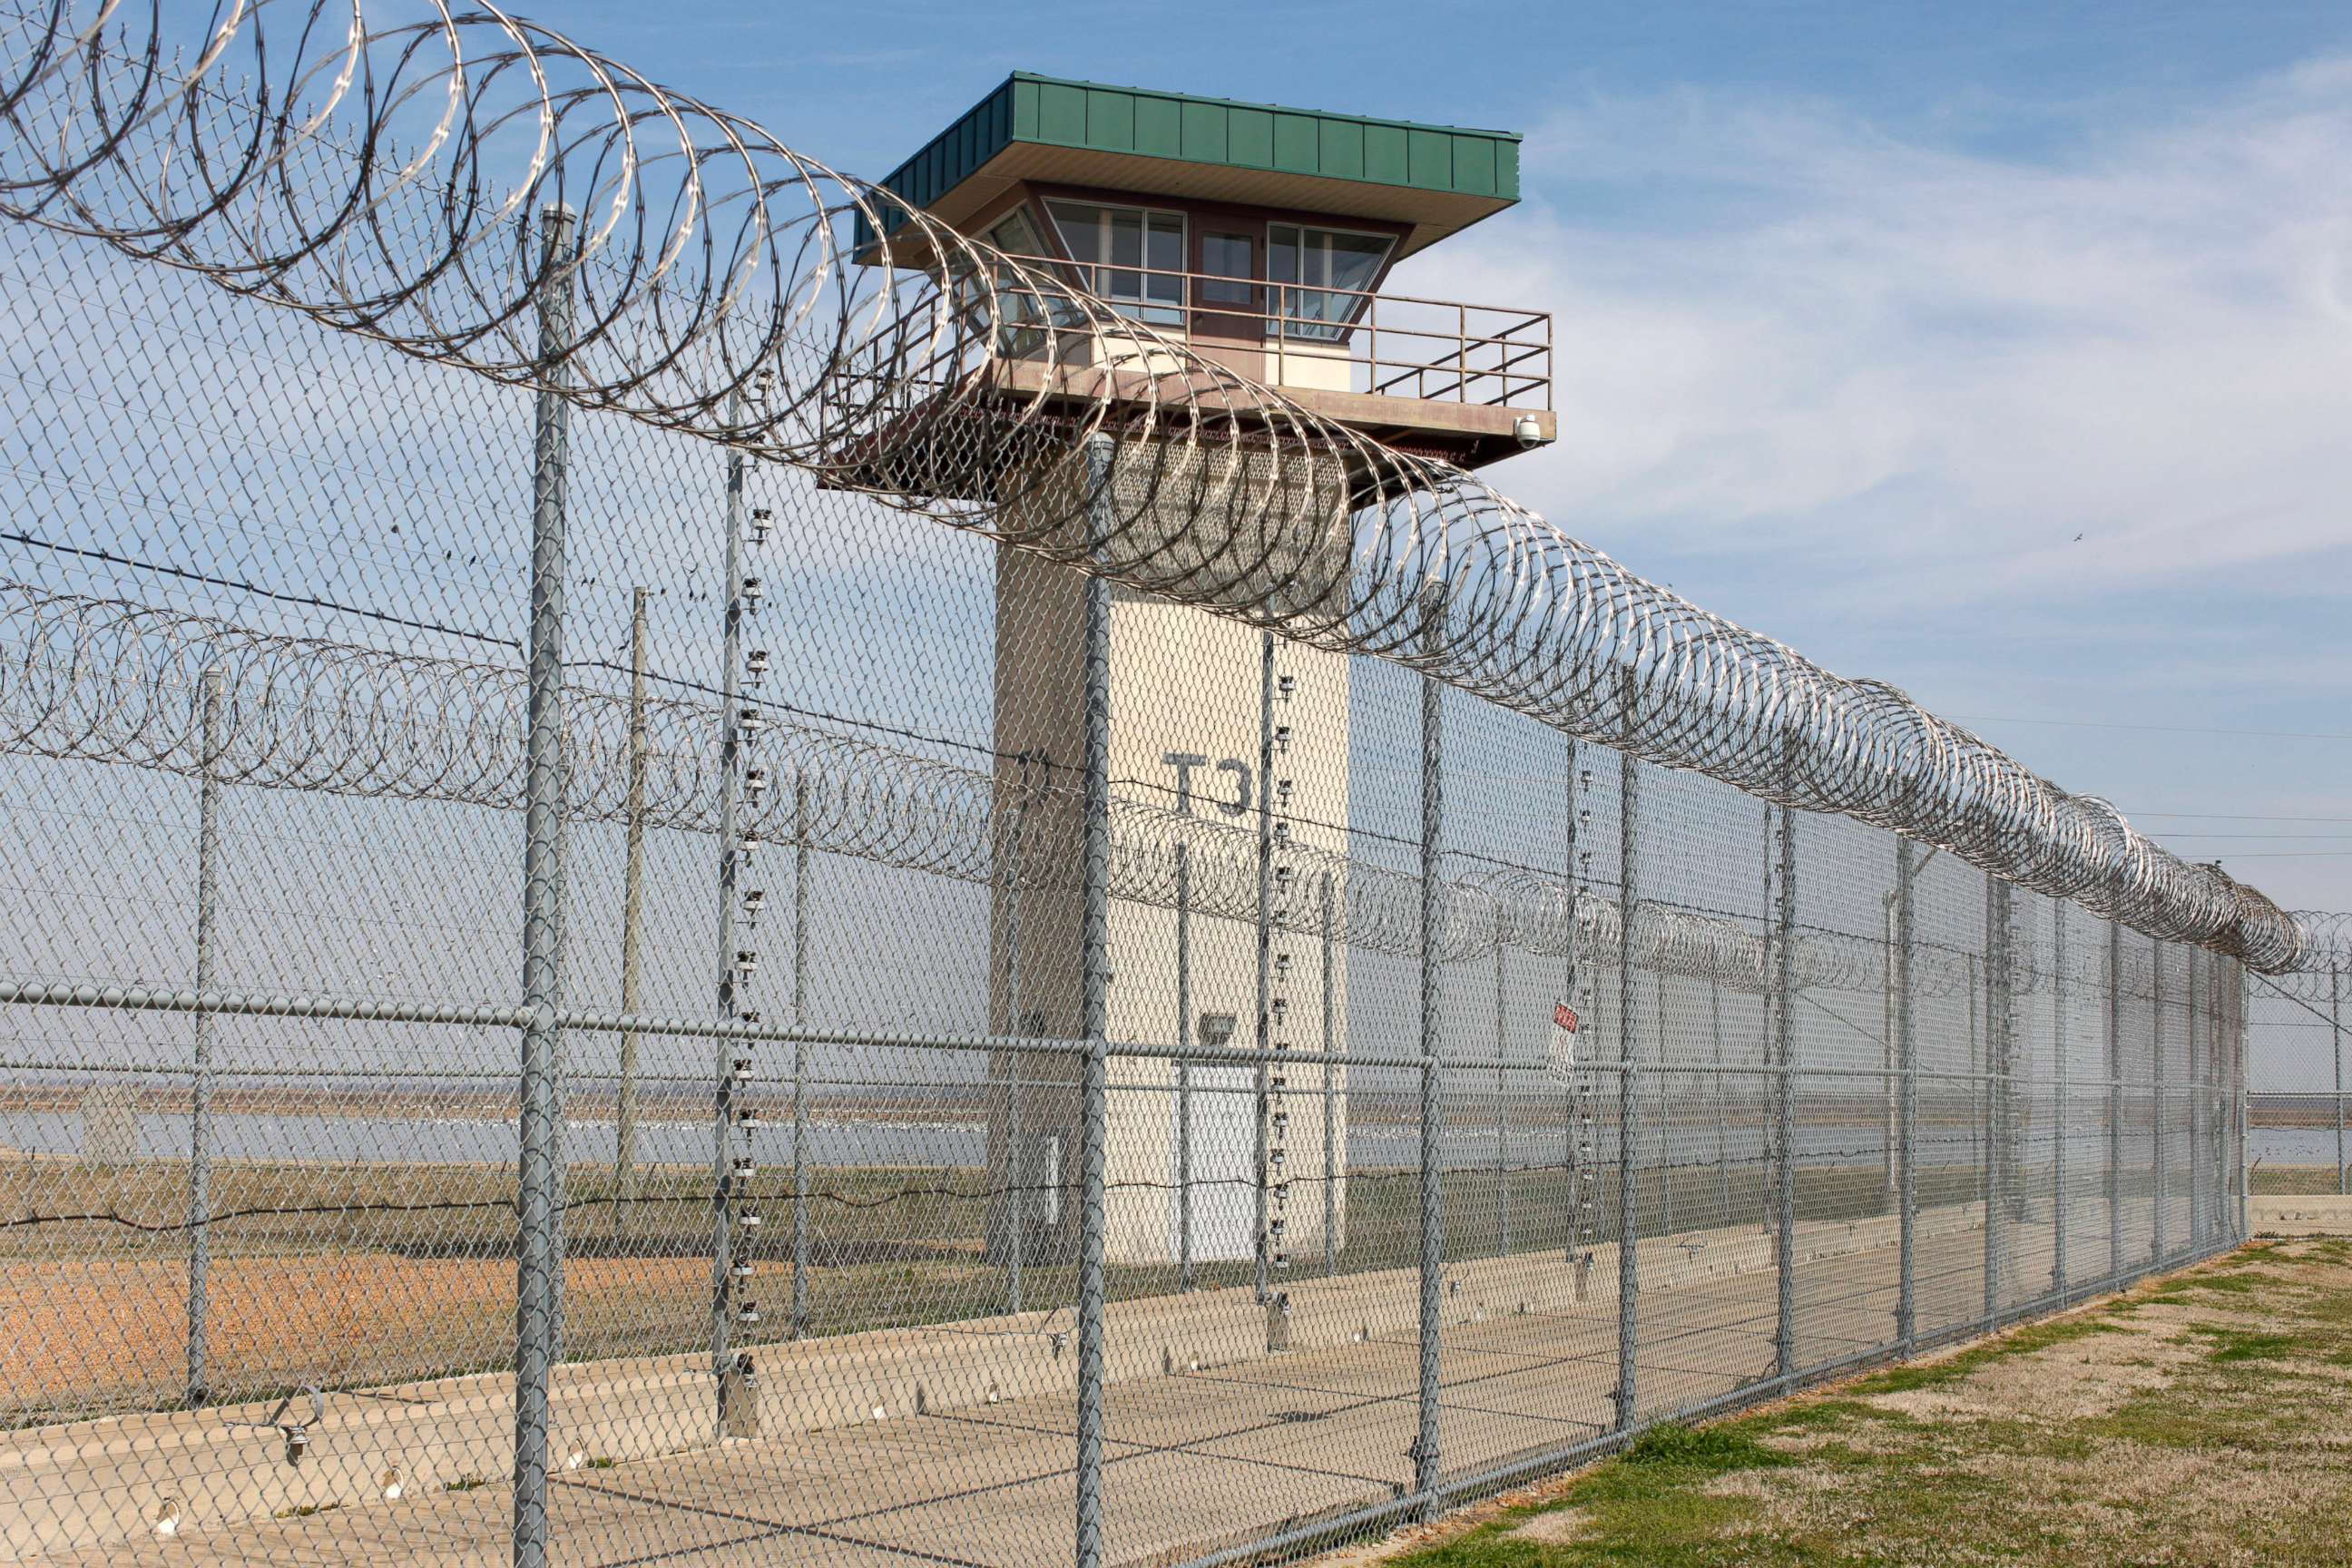 PHOTO: A guard tower stands at the Mississippi State Prison in Parchman, Miss., Feb. 27, 2012.